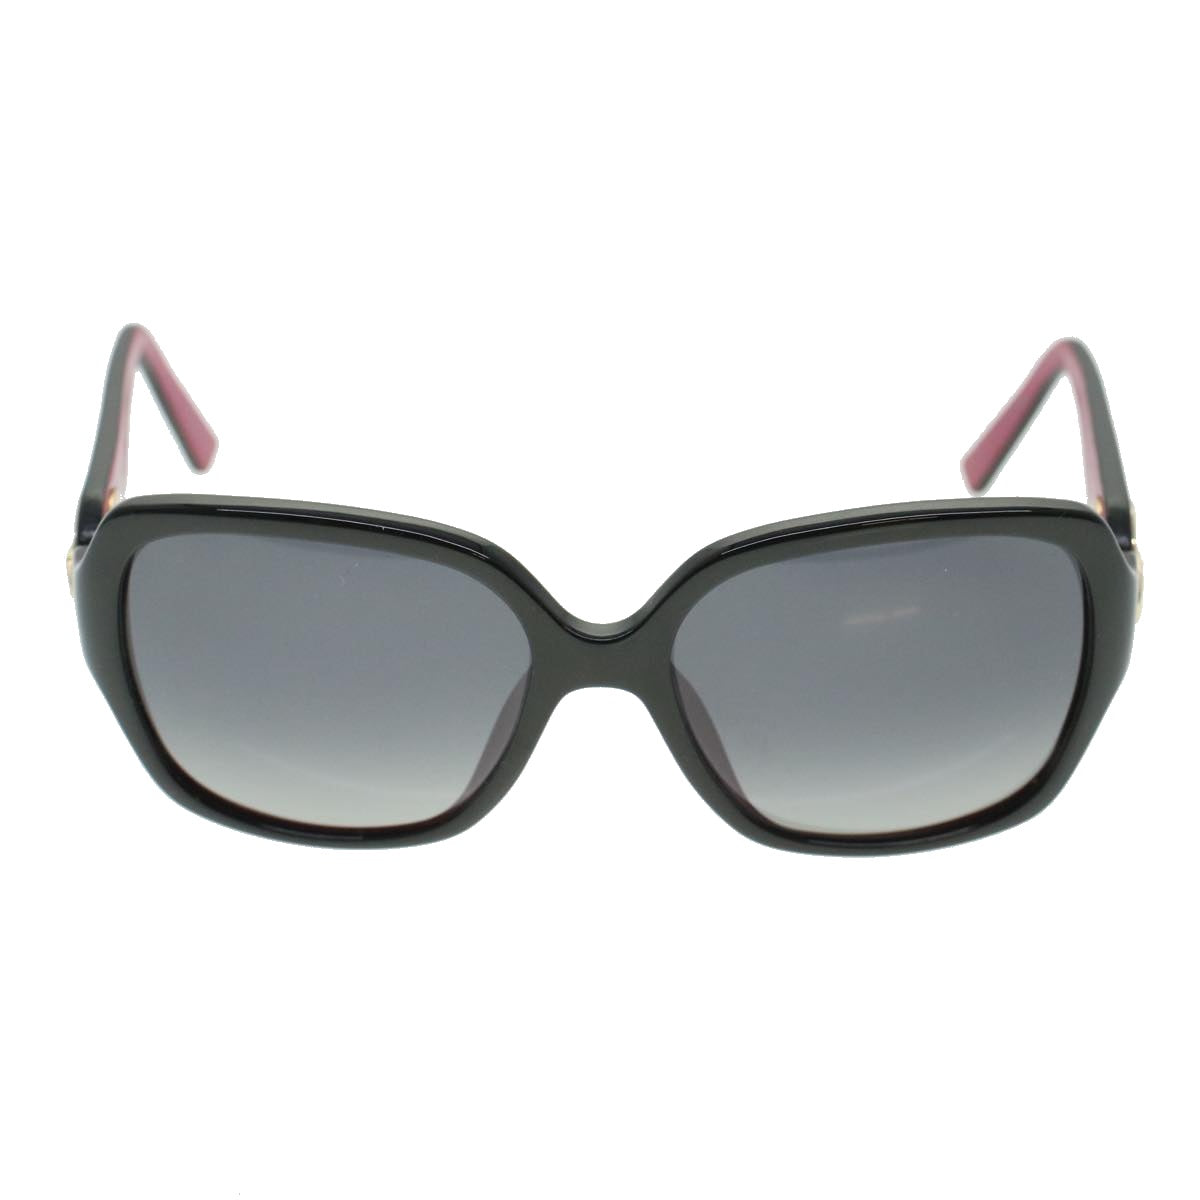 Christian Dior Sunglasses Black Pink Auth cl607 - 0